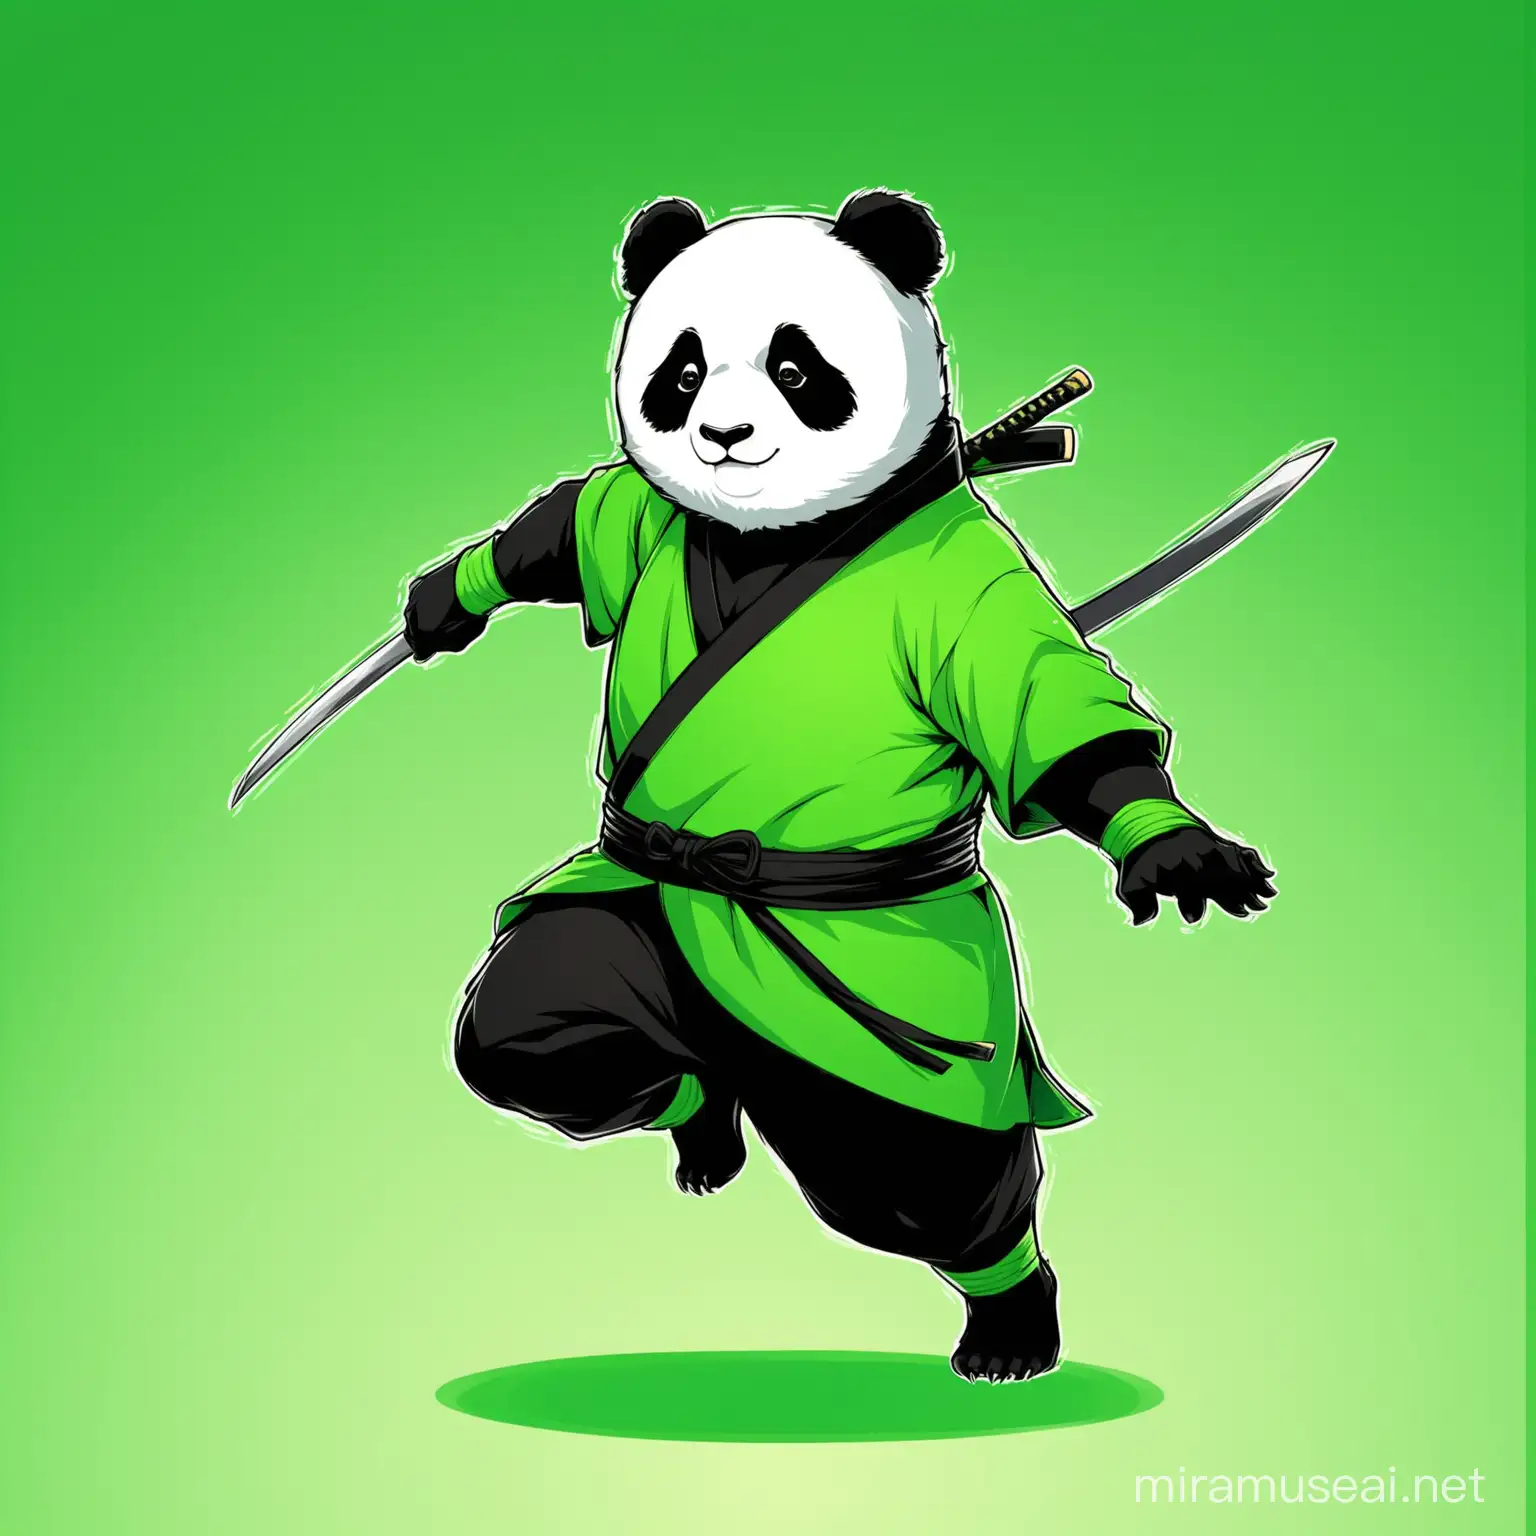 Create a super ninja image adding full body part of a panda use green color like the one I send and maintain same face